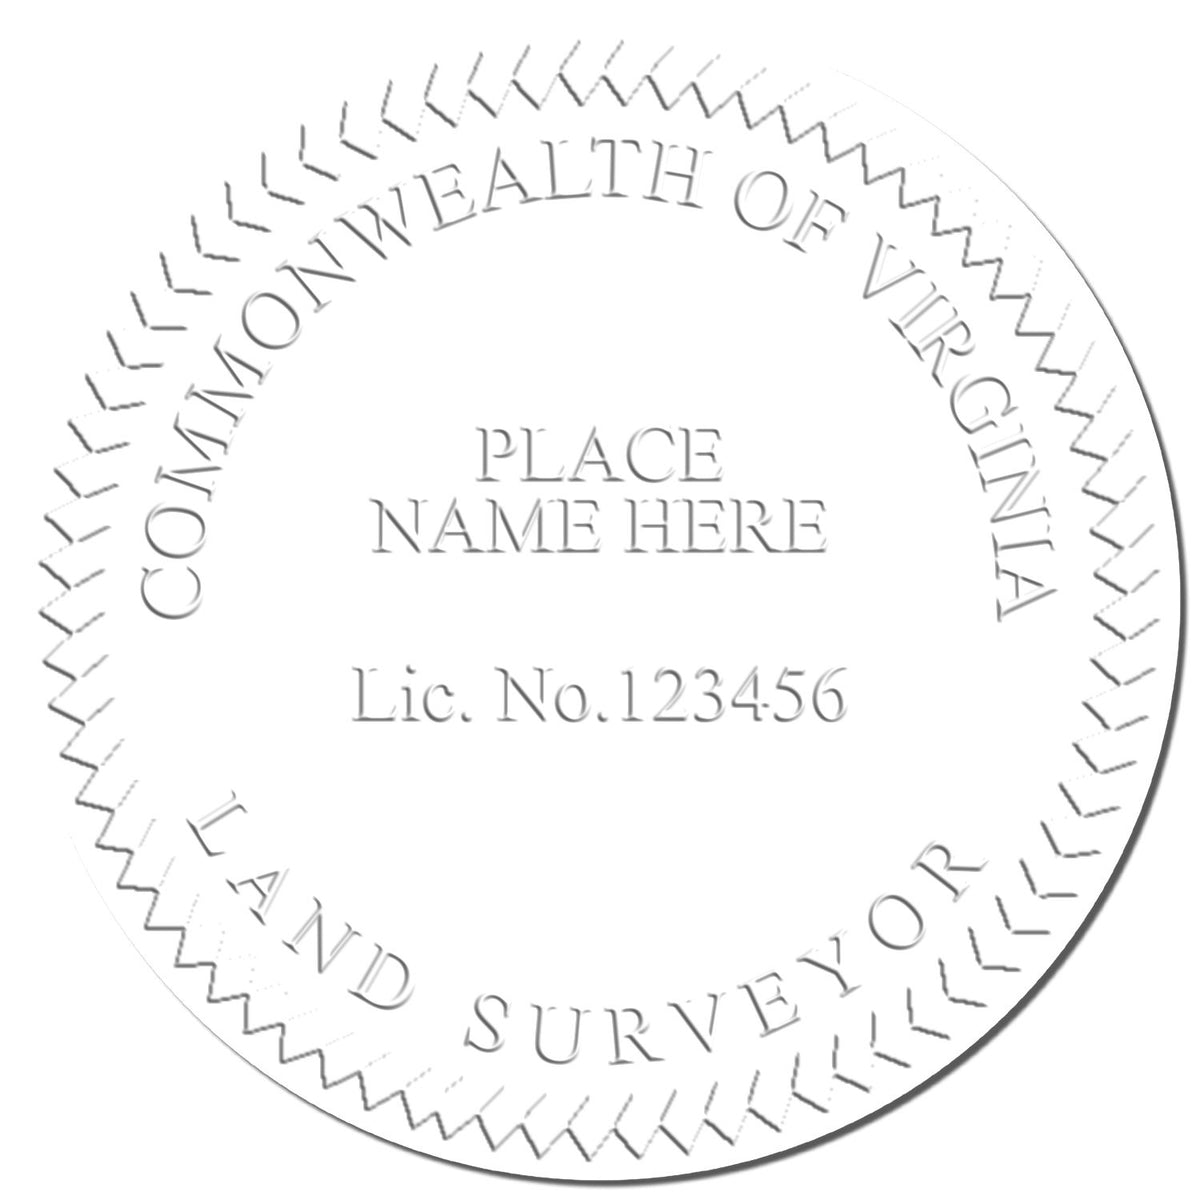 This paper is stamped with a sample imprint of the Hybrid Virginia Land Surveyor Seal, signifying its quality and reliability.